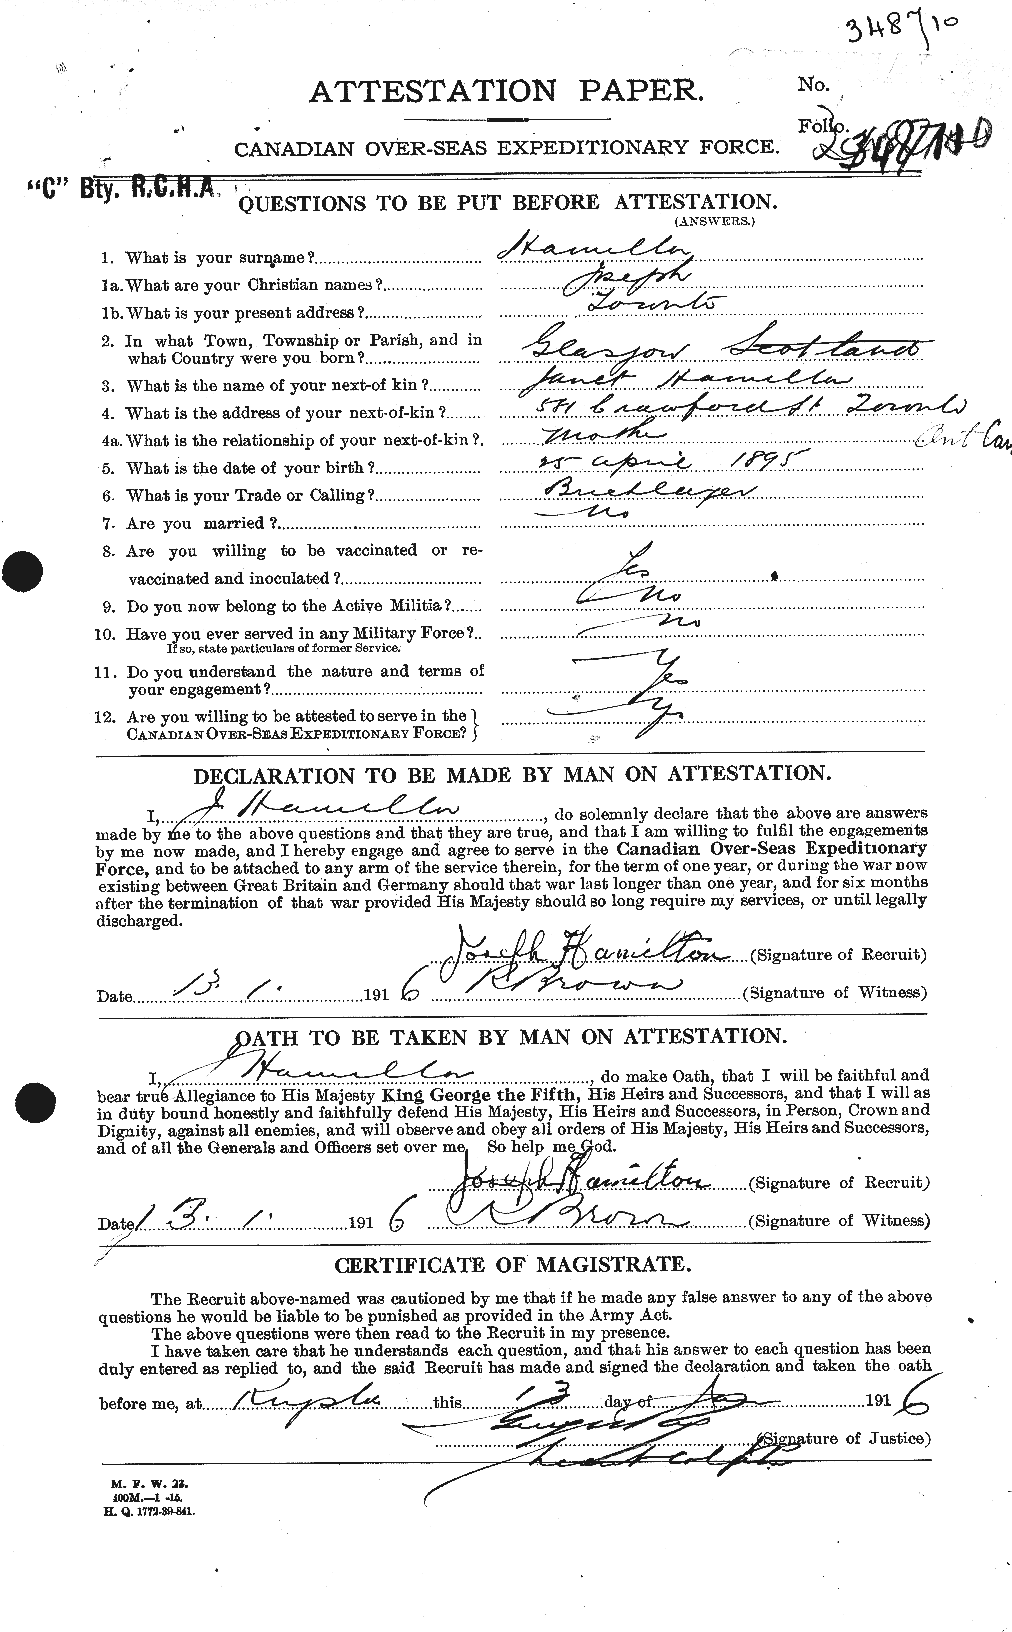 Personnel Records of the First World War - CEF 373133a